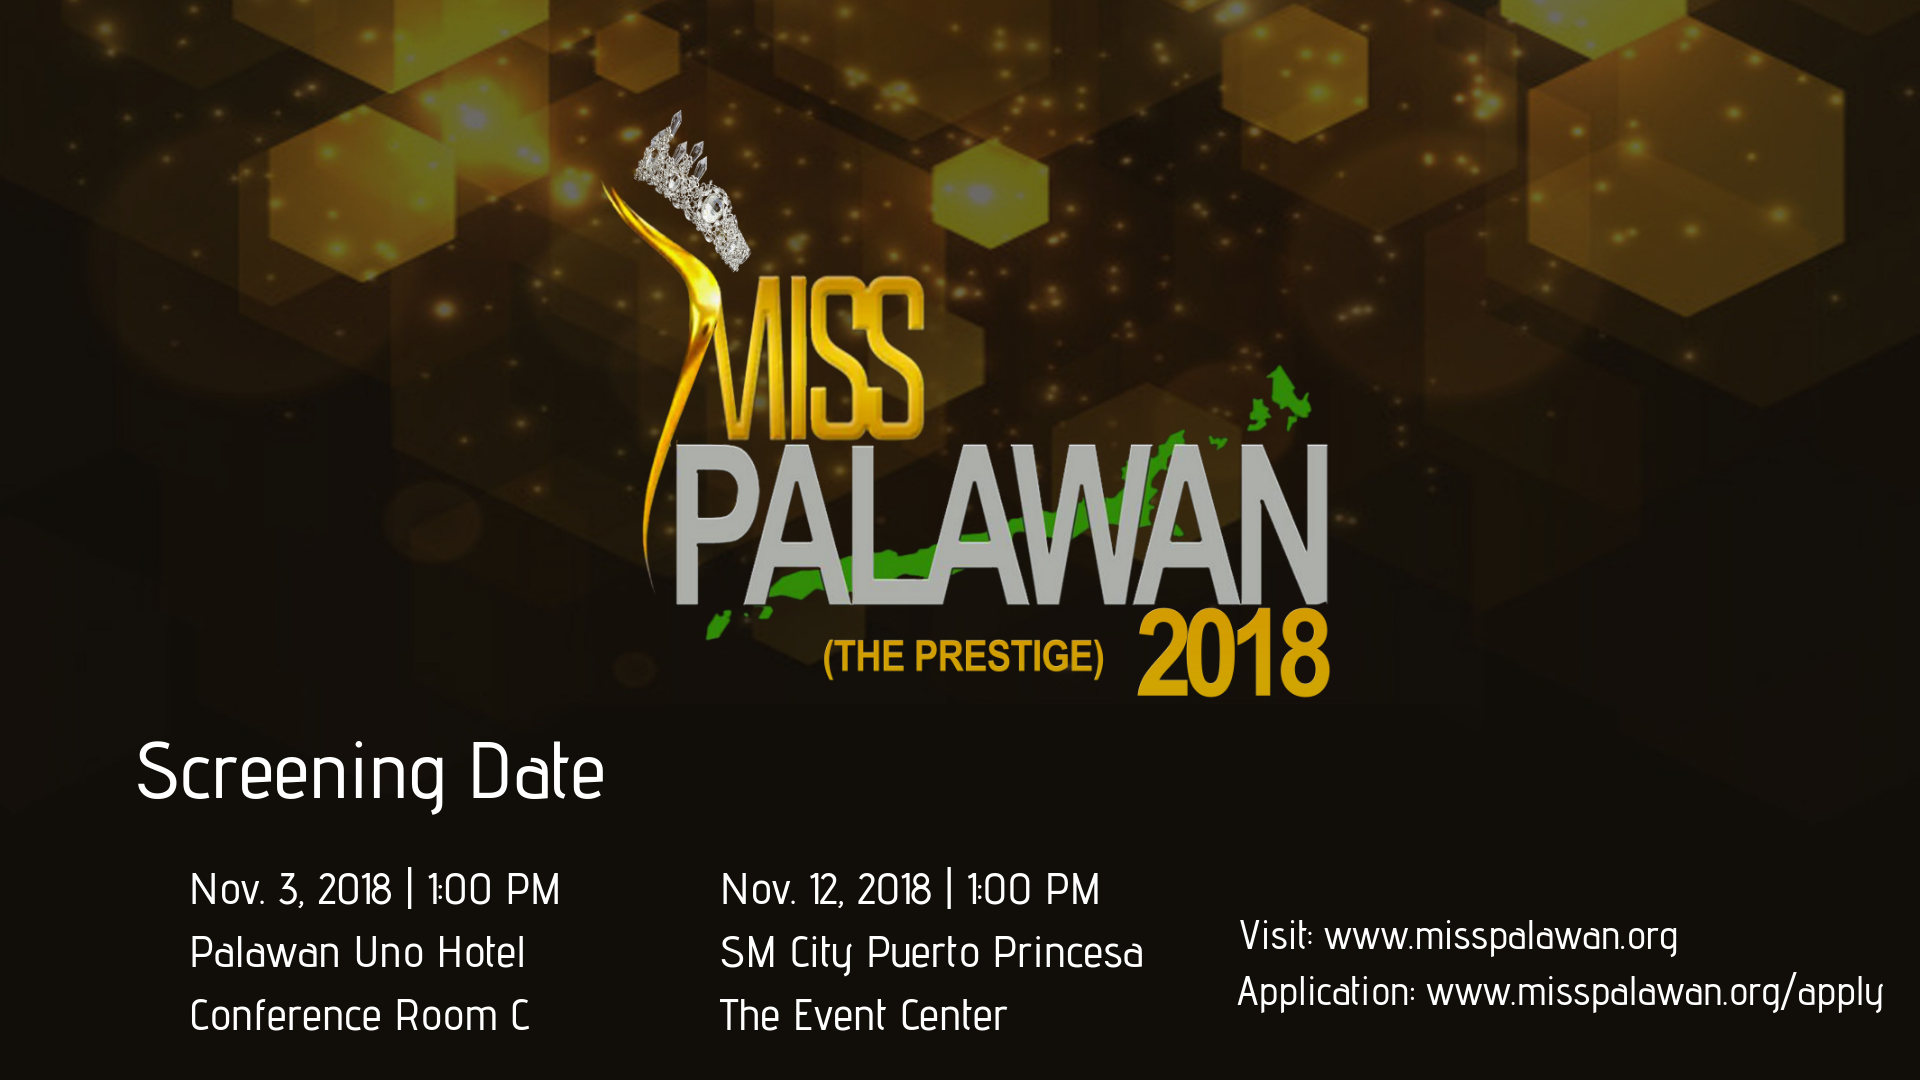 Announcing the new Palawan beauty pageant, Miss Palawan 2018!